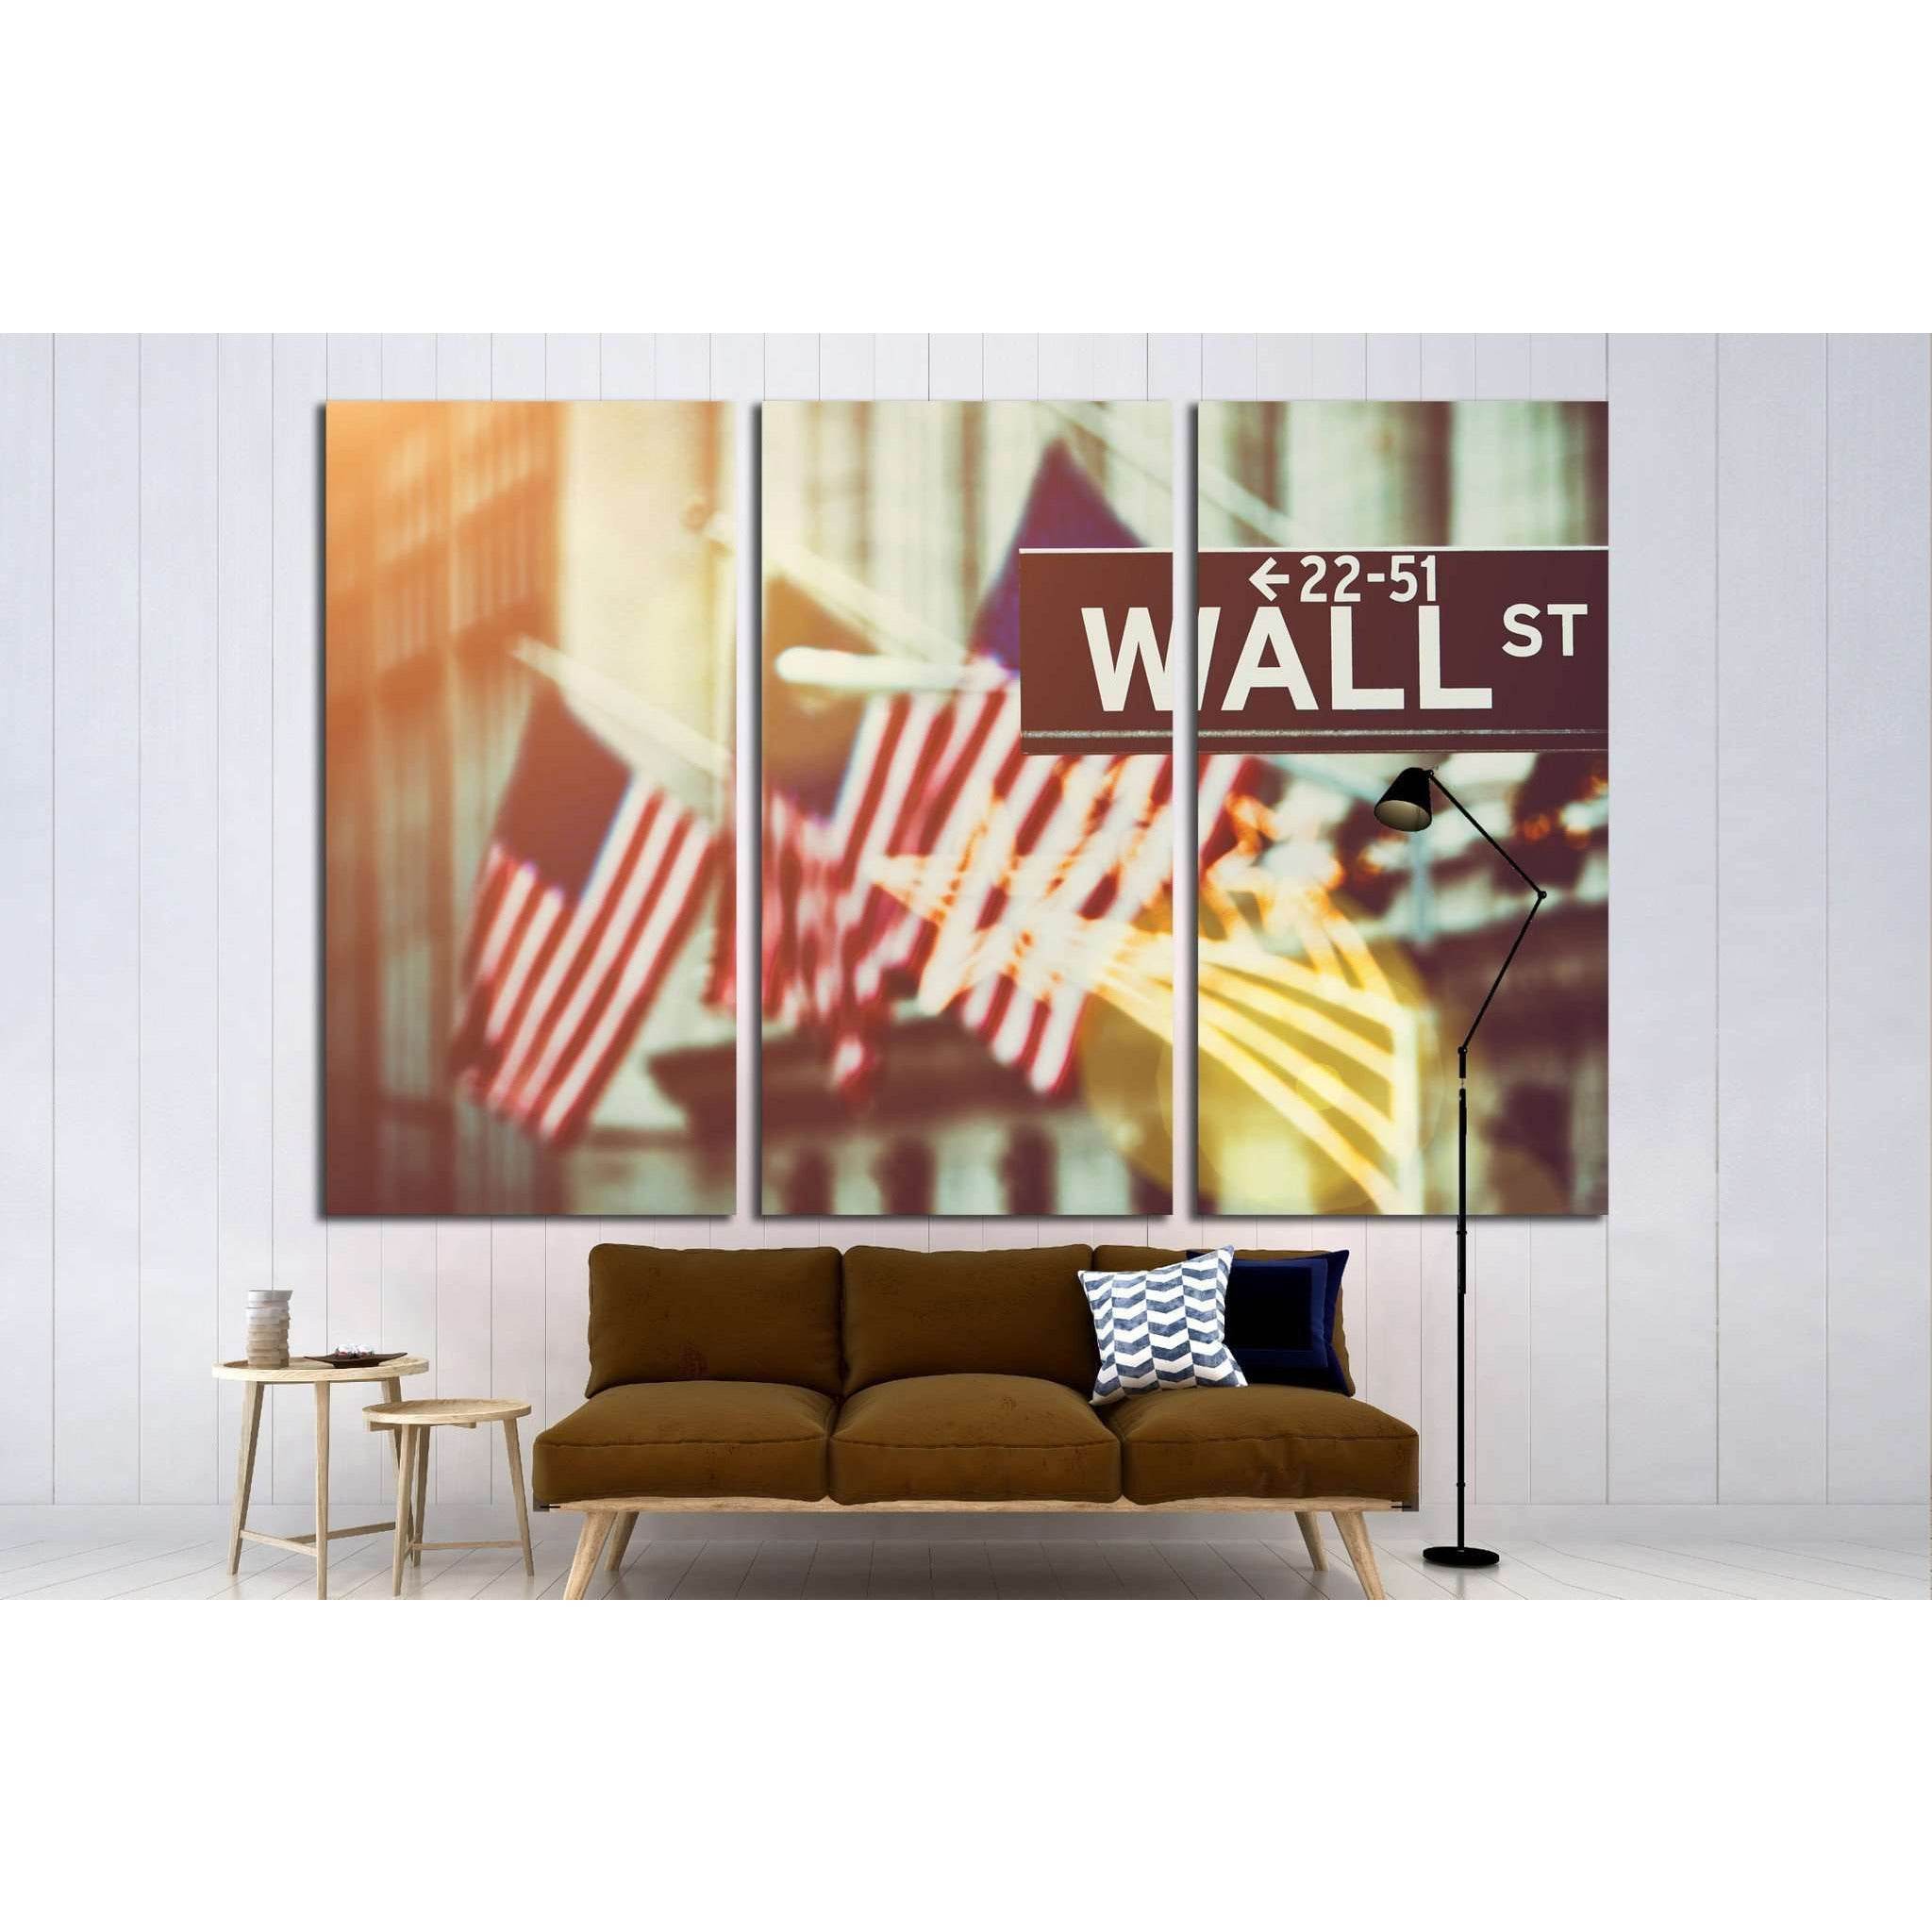 Wall street sign in New York with New York Stock Exchange №1779 Ready to Hang Canvas Print